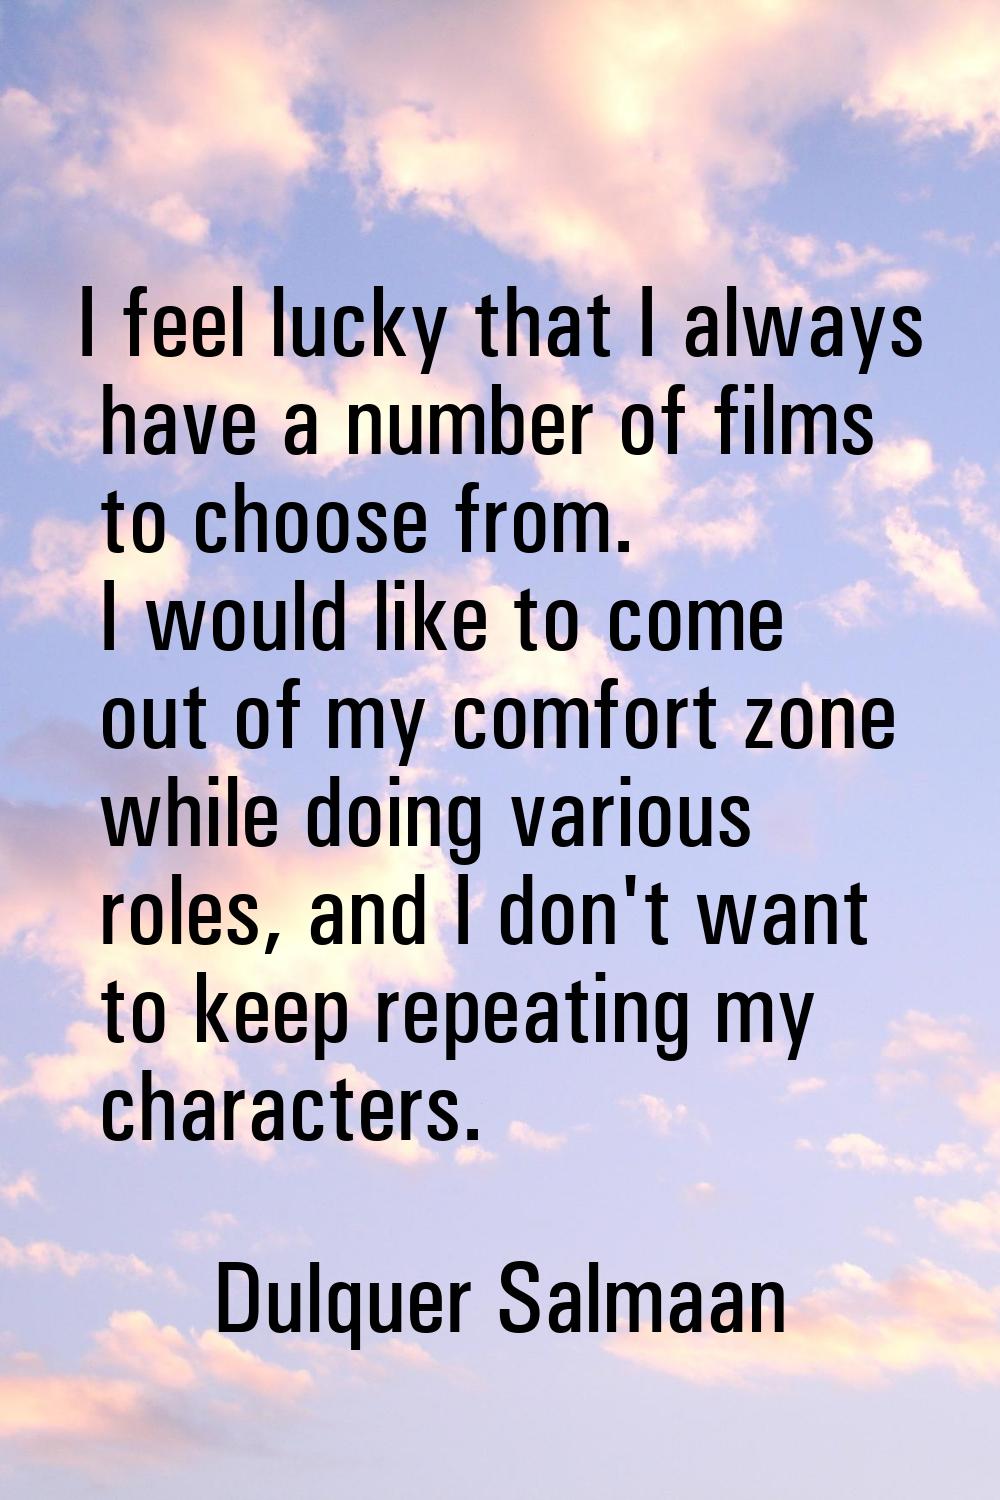 I feel lucky that I always have a number of films to choose from. I would like to come out of my co